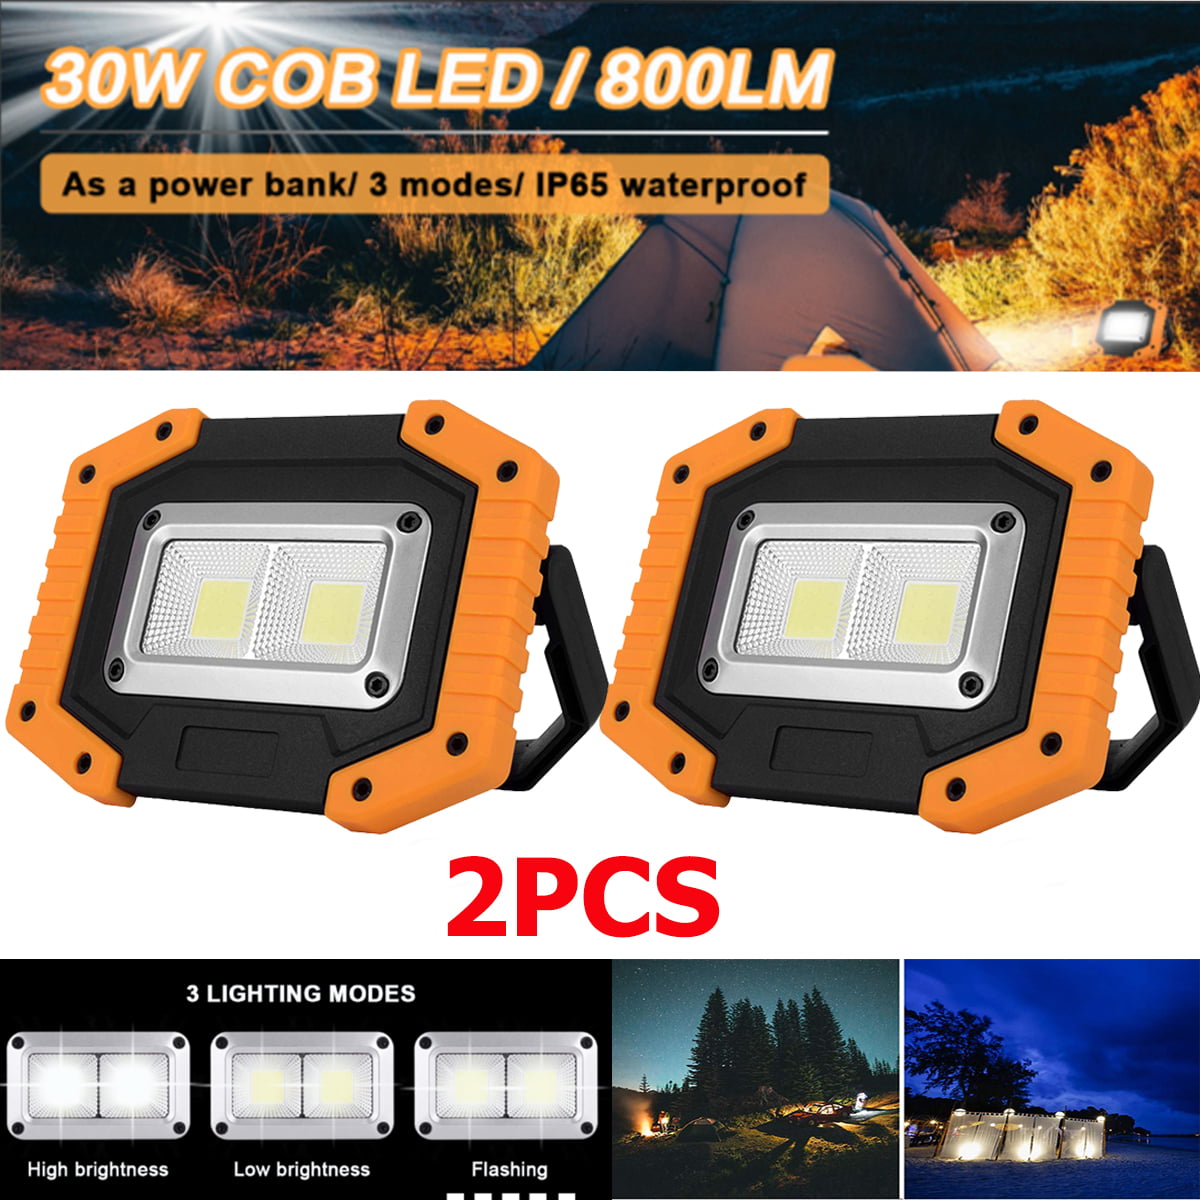 AUG Portable 800LM COB  Rechargeable Emergency Flood Light Lamp Outdoor Working 